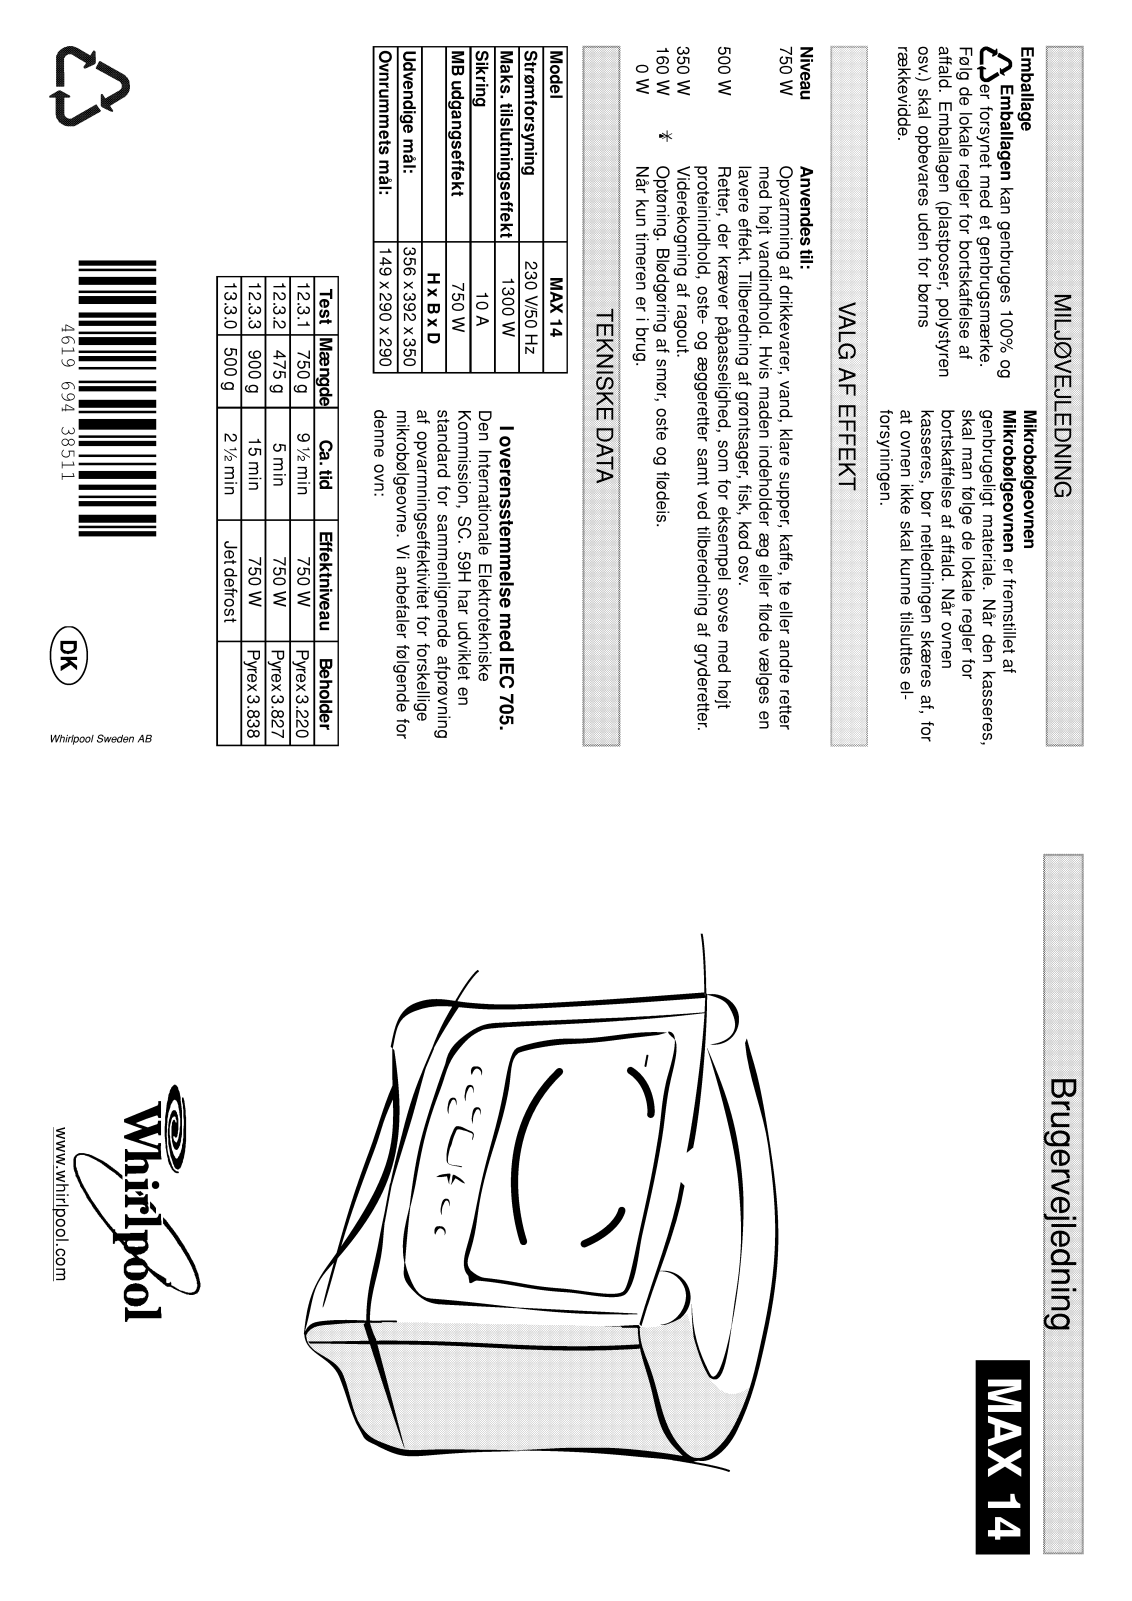 Whirlpool MAX 14/AW/2, MAX 14/AW, MAX 14/WH/2, MAX 14/WH, MAX 14/AB INSTRUCTION FOR USE